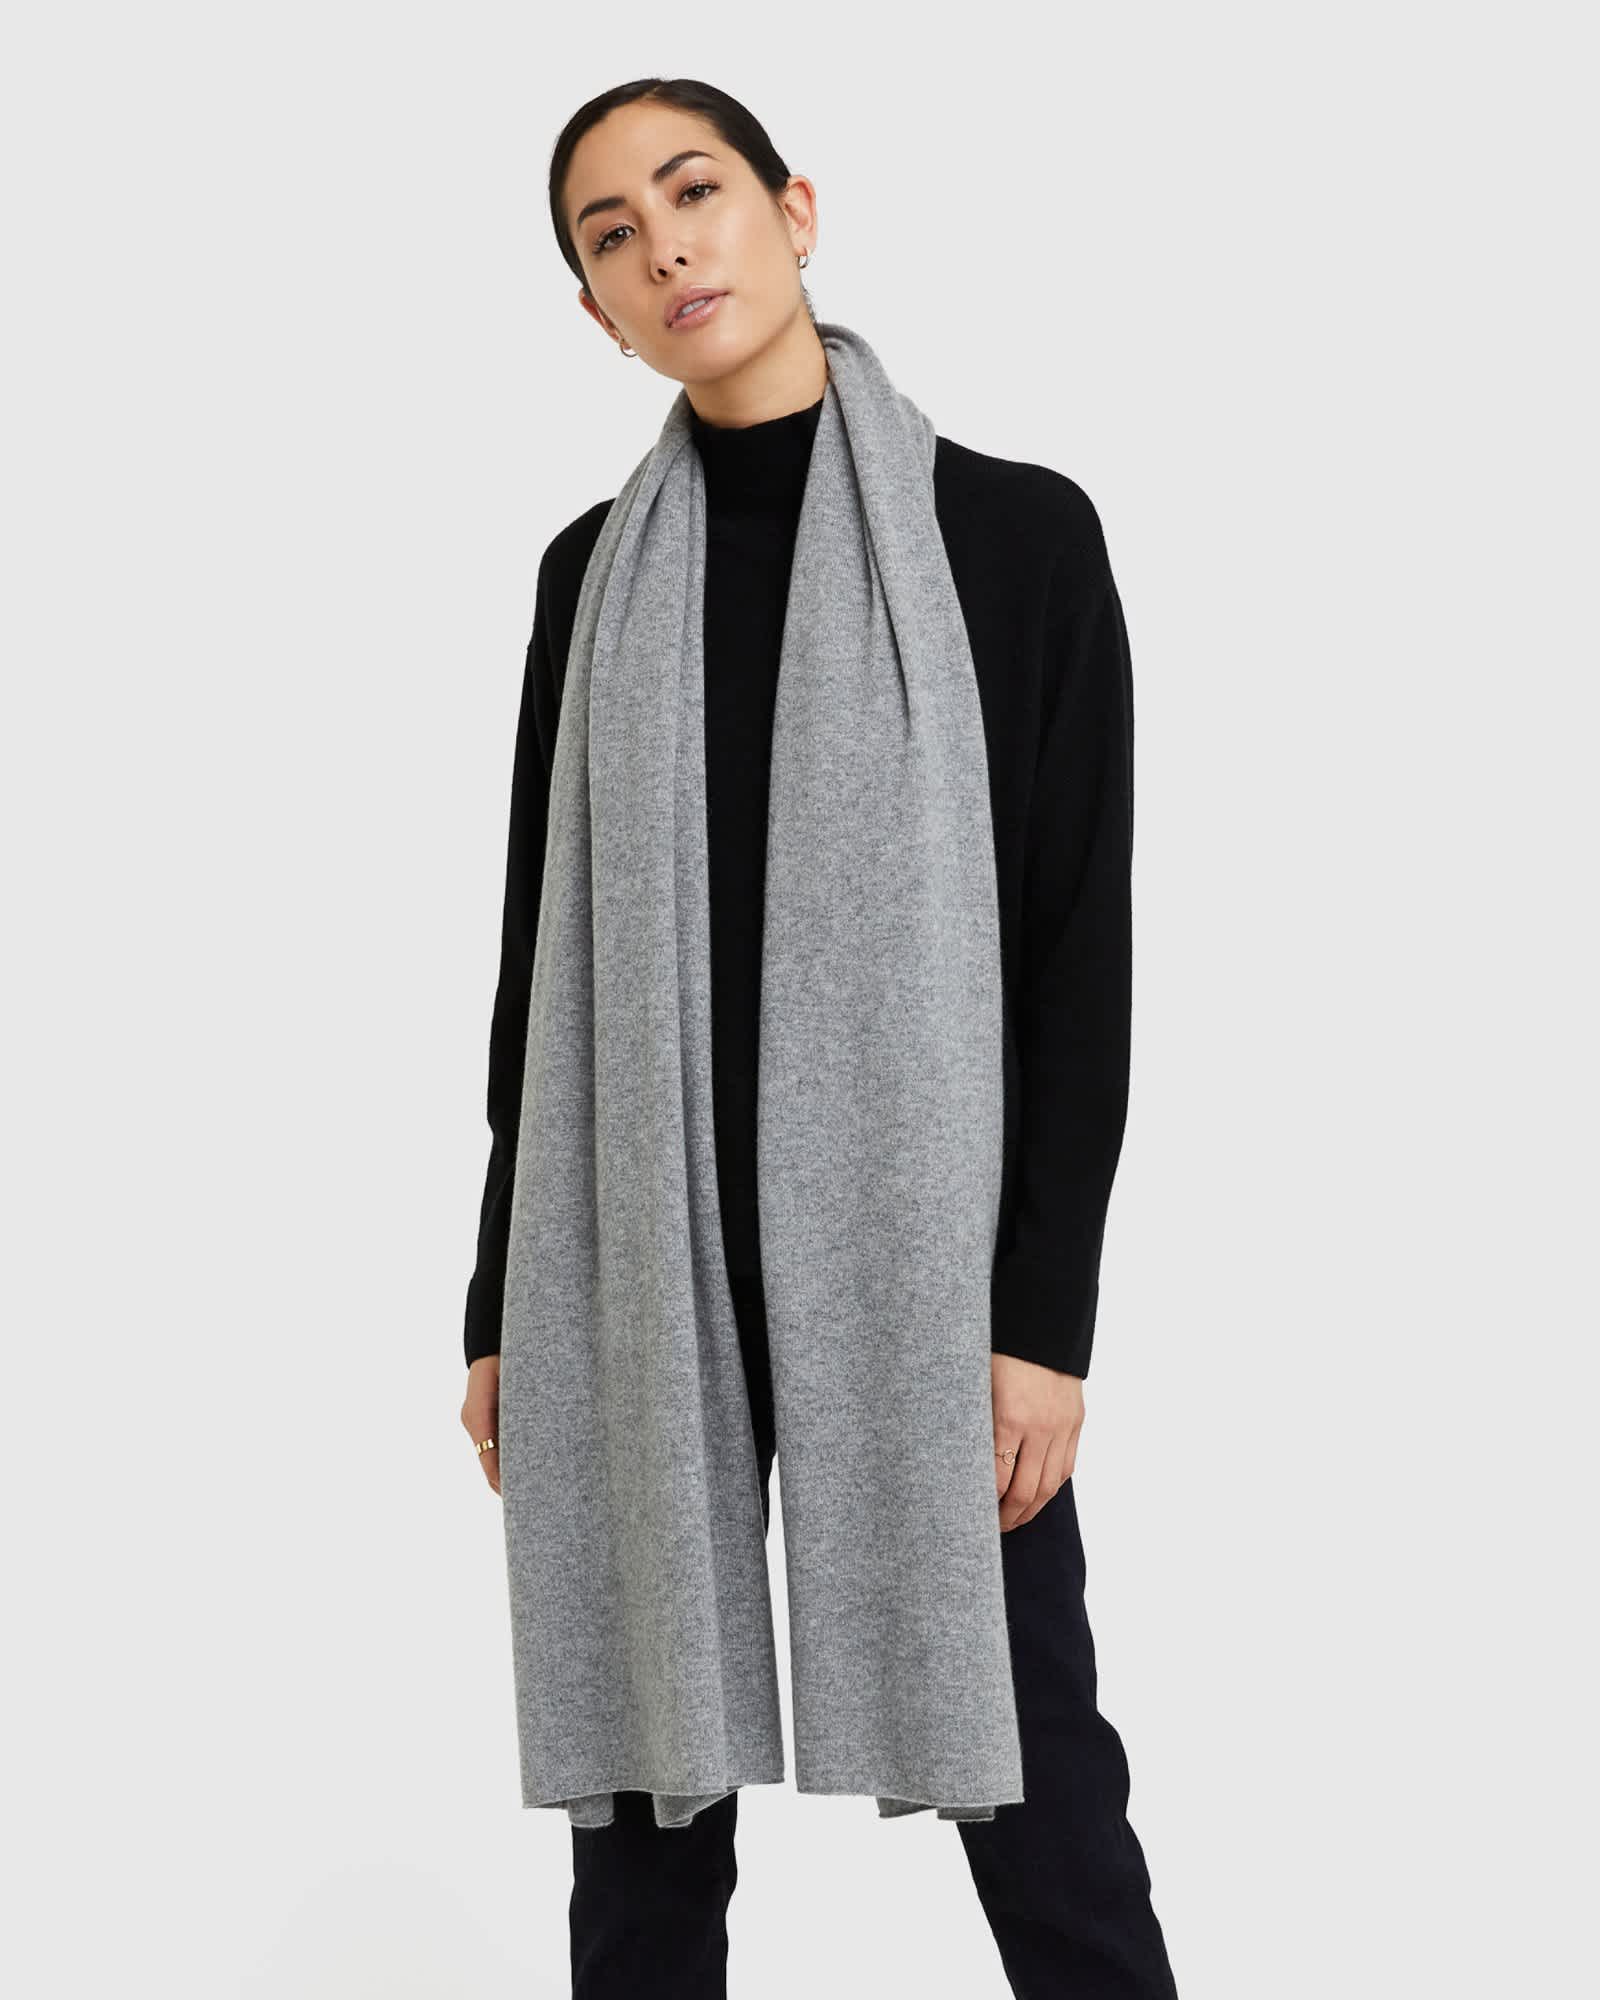 Woman wearing grey cashmere wrap & cashmere shawl wrap with black cashmere sweater